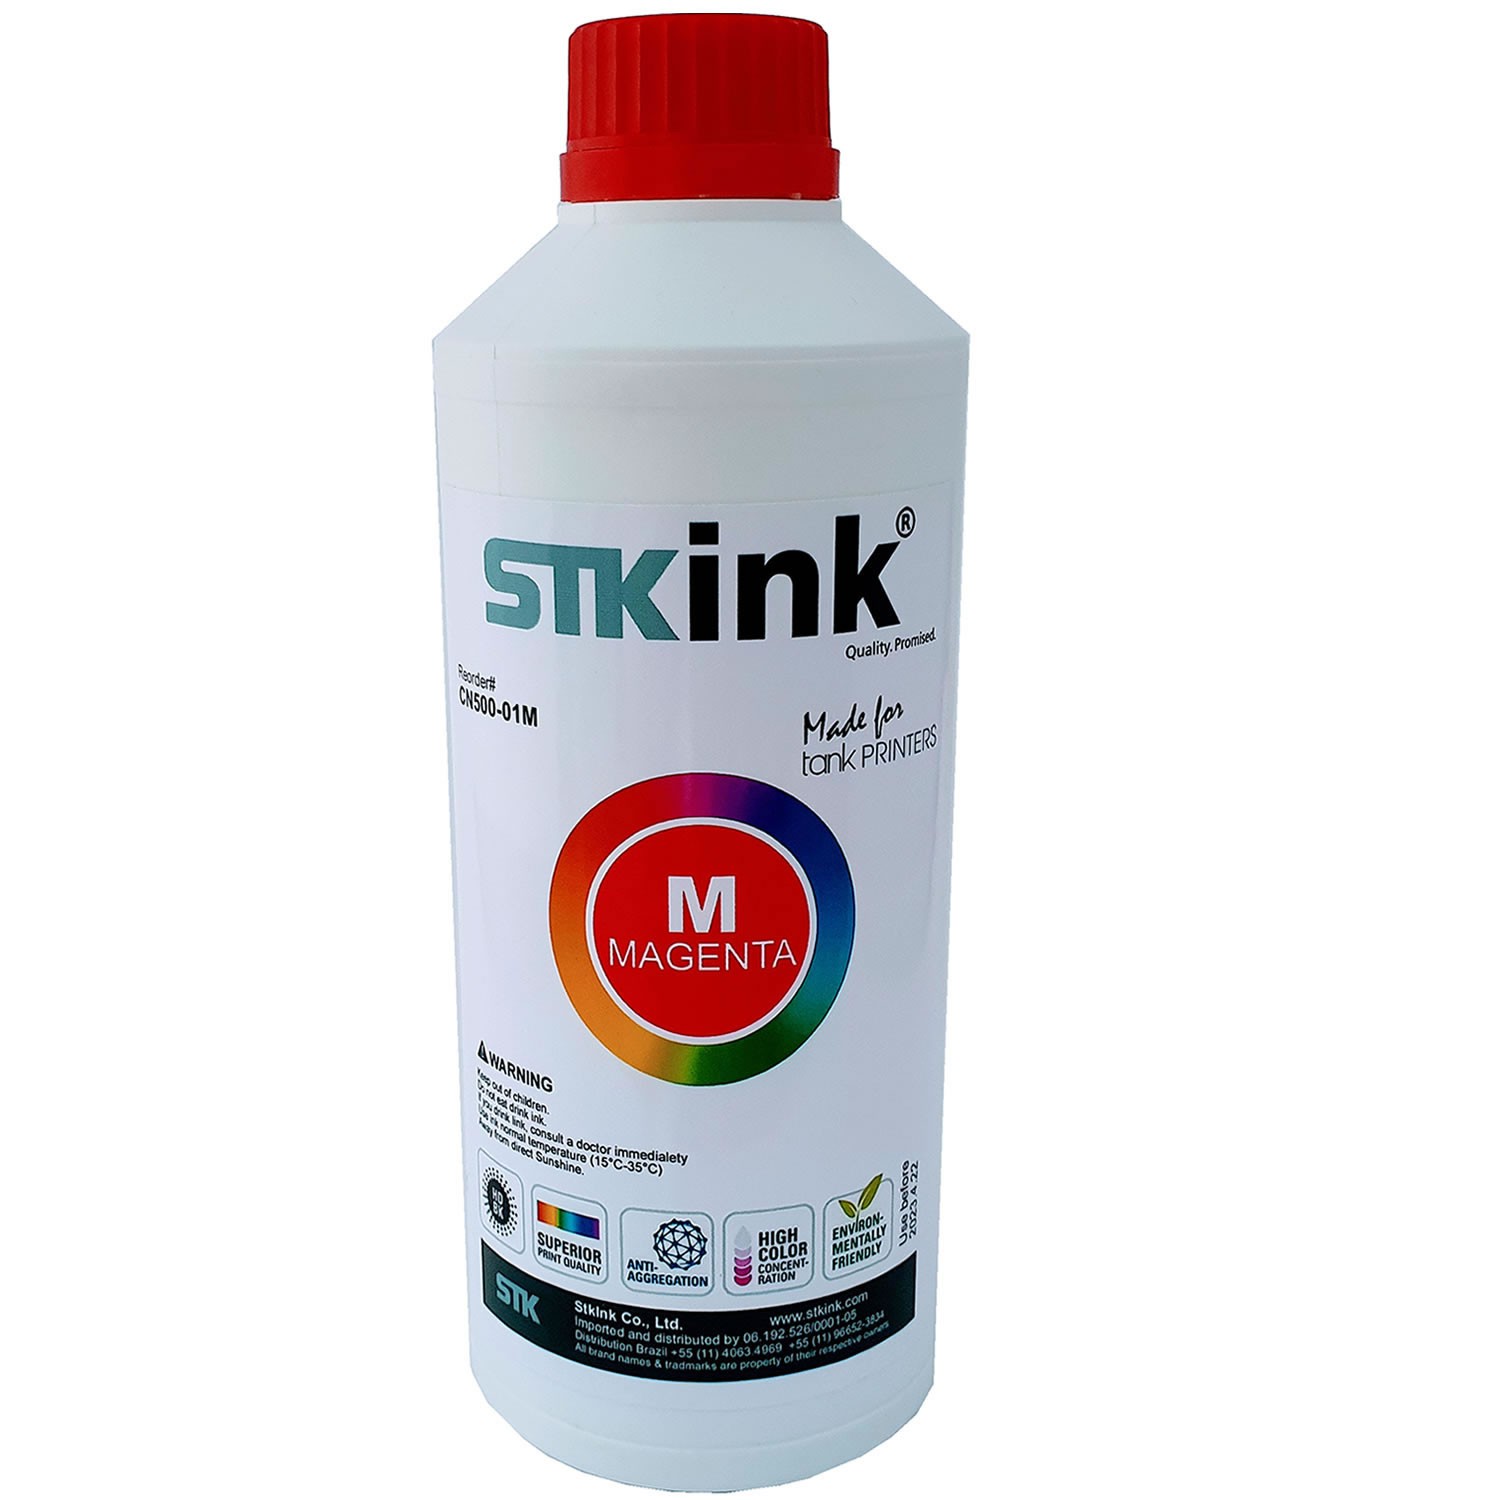 3 x 250ml Tinta STK BT5001 BT6001 T510W T710W T810W T910DW para InkTank Brother